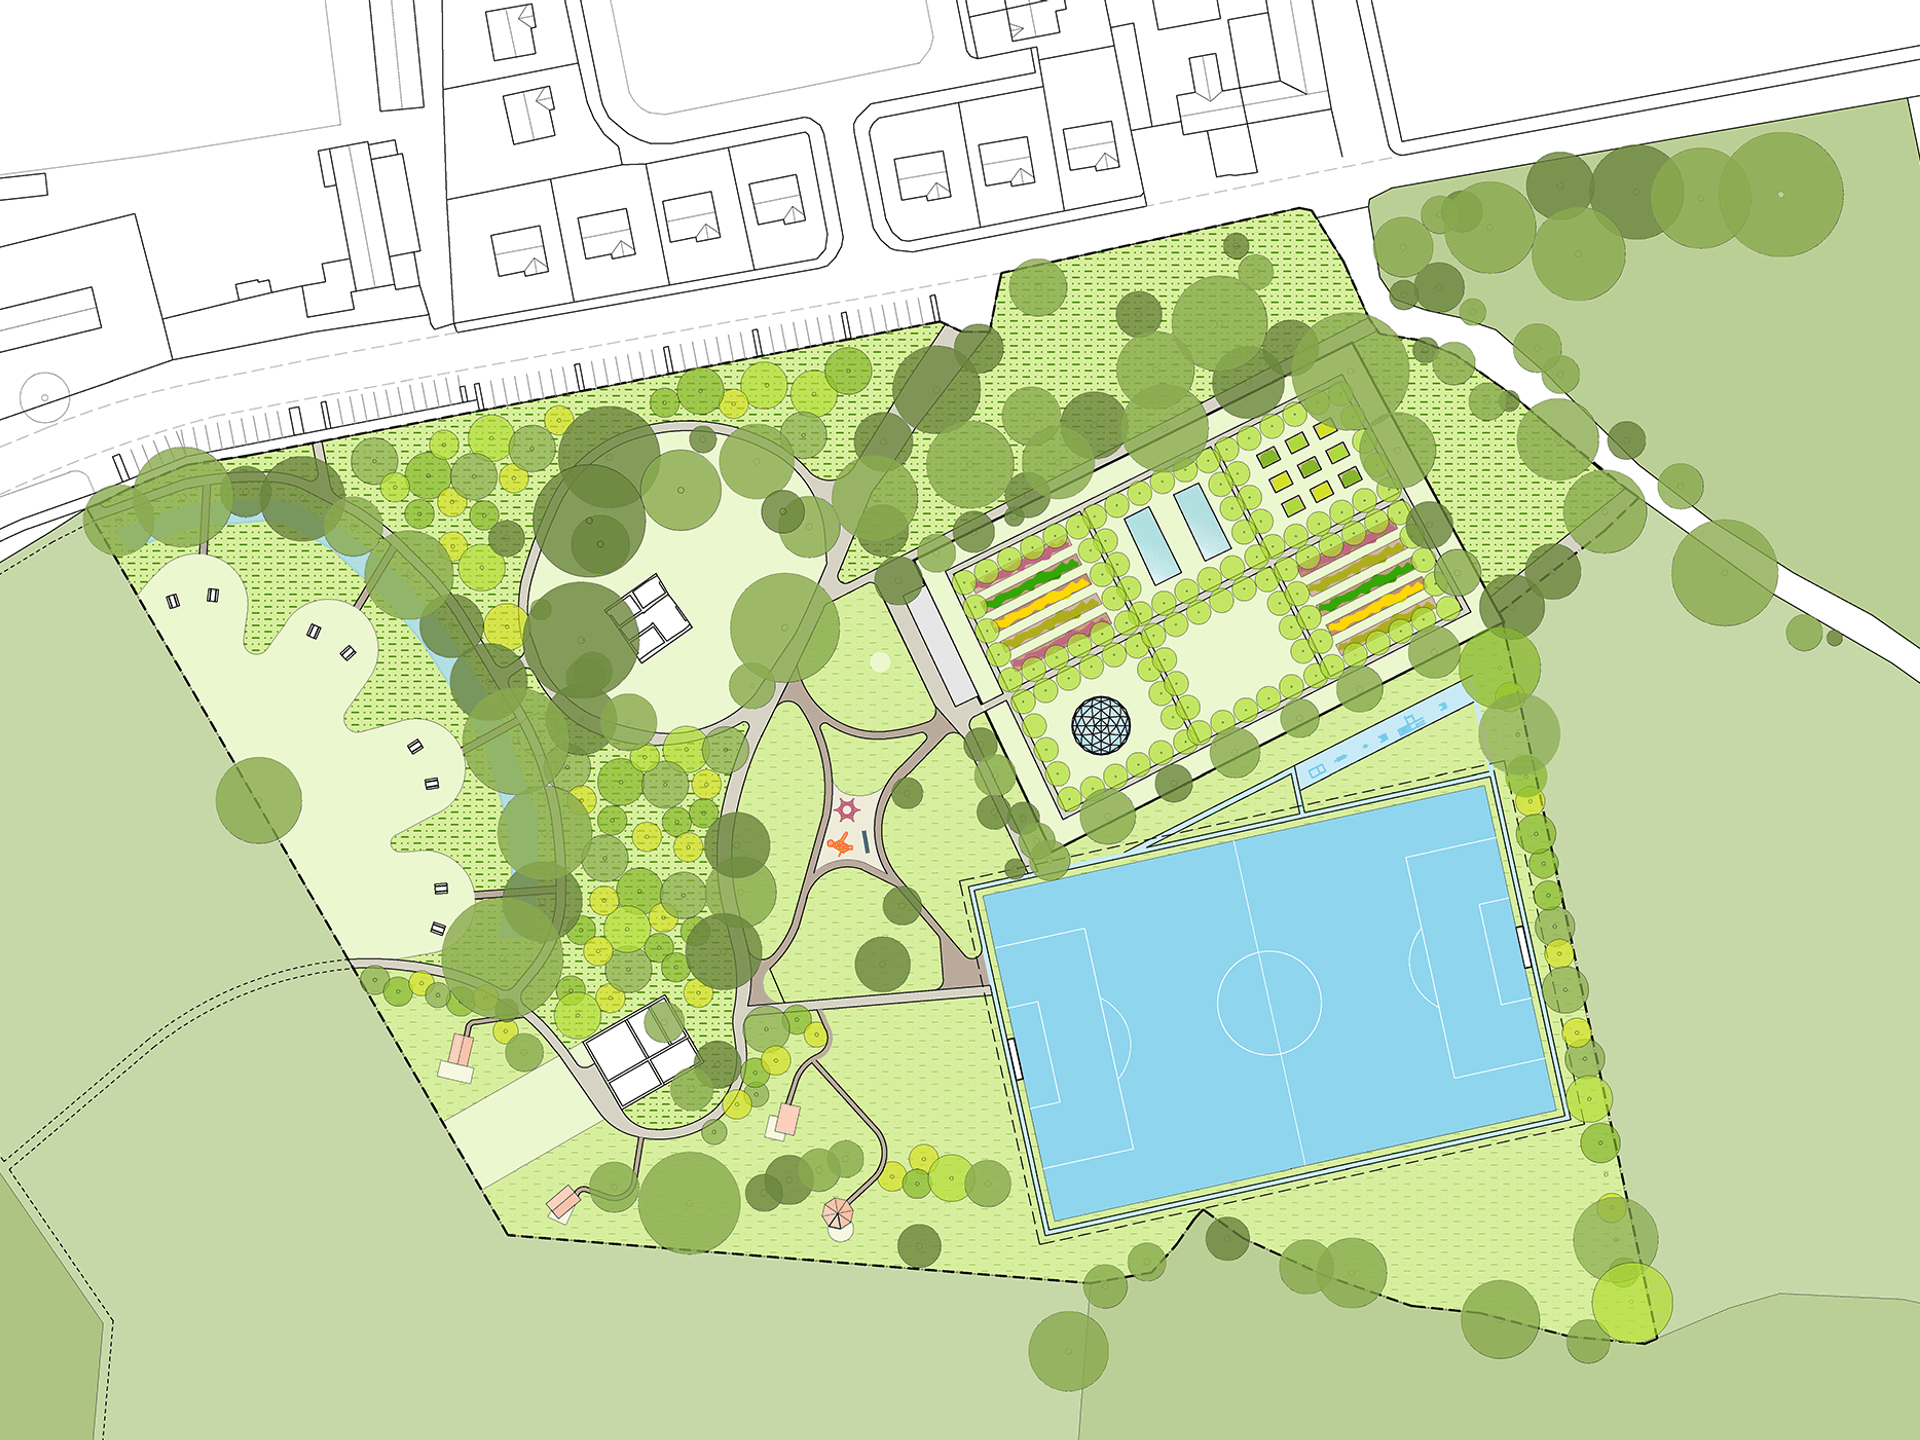 Creation of an outdoor gym and sports pitch for the community to have easy access to an active way of living.